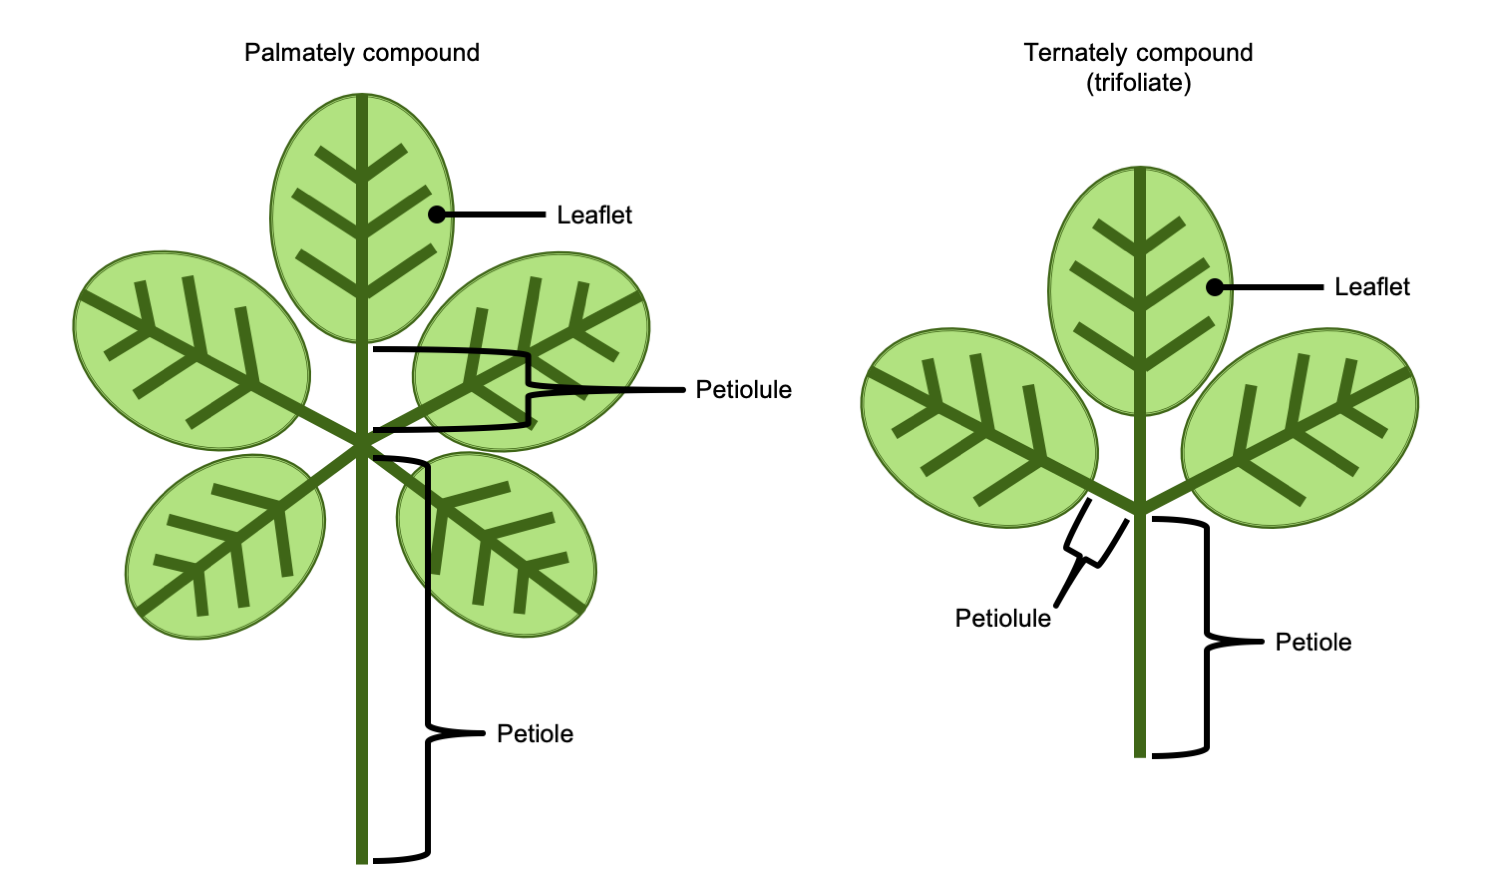 2 Diagrams of compound leaves. Diagram 1: Palmately compound (leaflets radiating from one point). Diagram 2: Ternately compound leaf (3 leaflets radiating from one point).